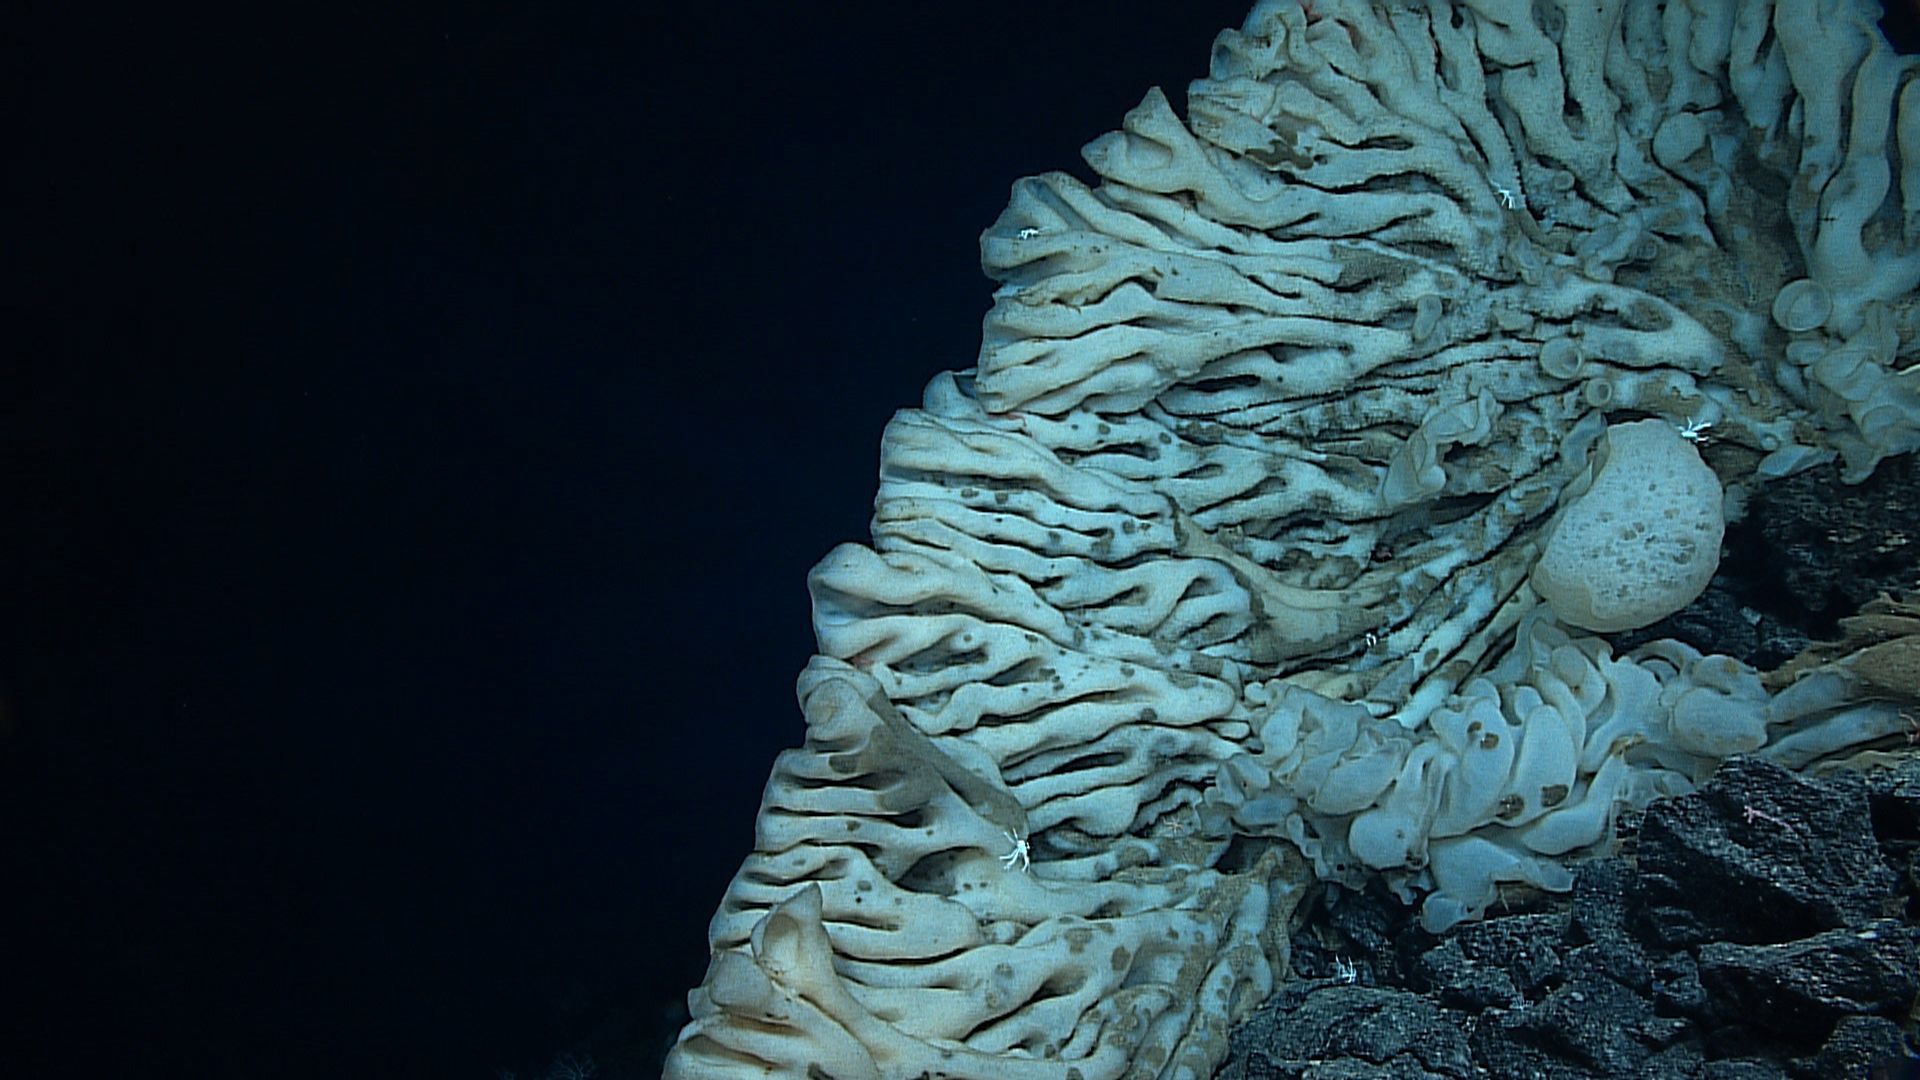 The massive sponge is photographed in 2015 at a depth of about 7,000 feet in the Papahanaumokuakea Marine National Monument.